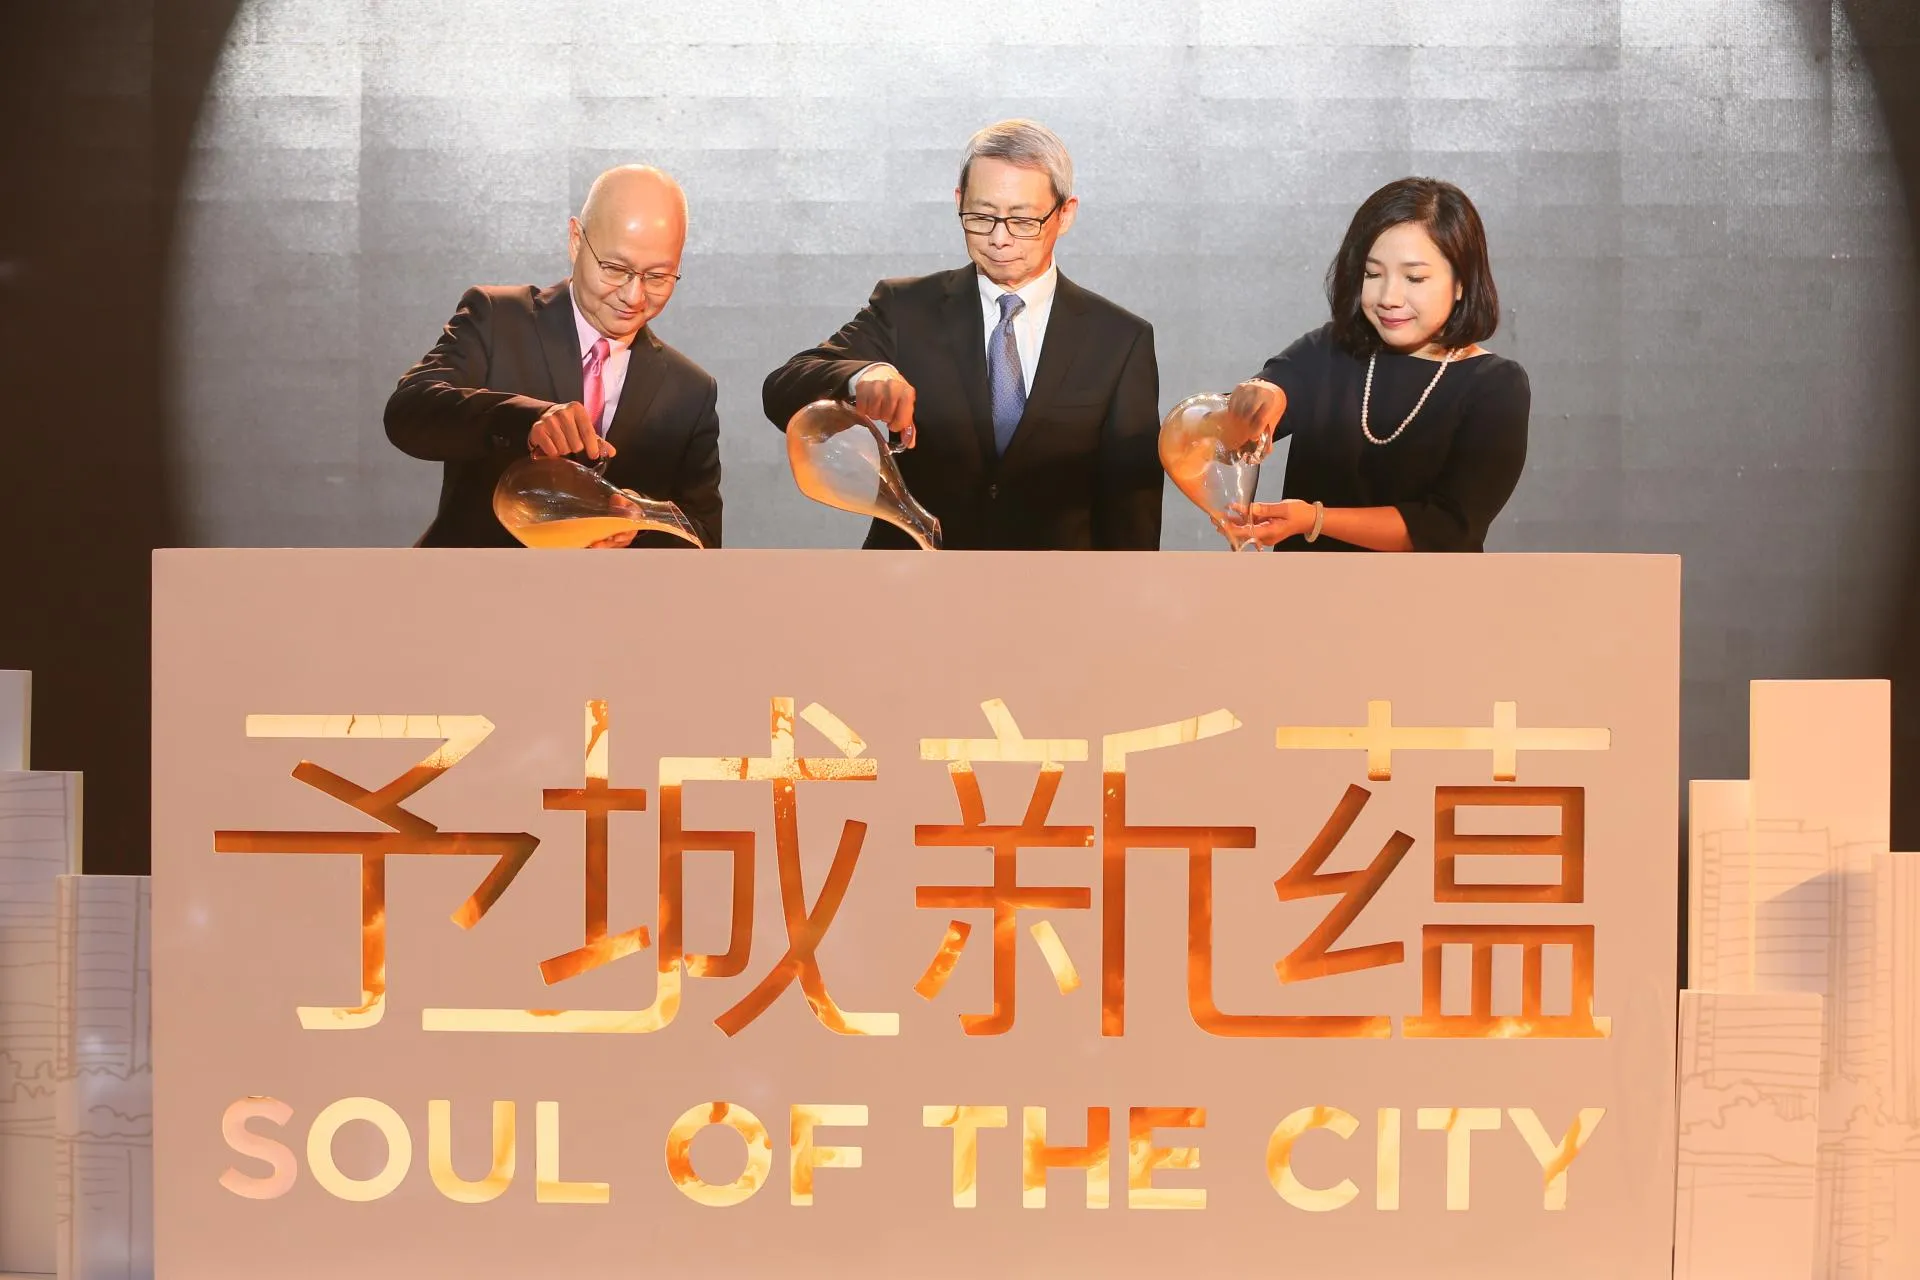 NWC launches new brand promise, Soul of the City.